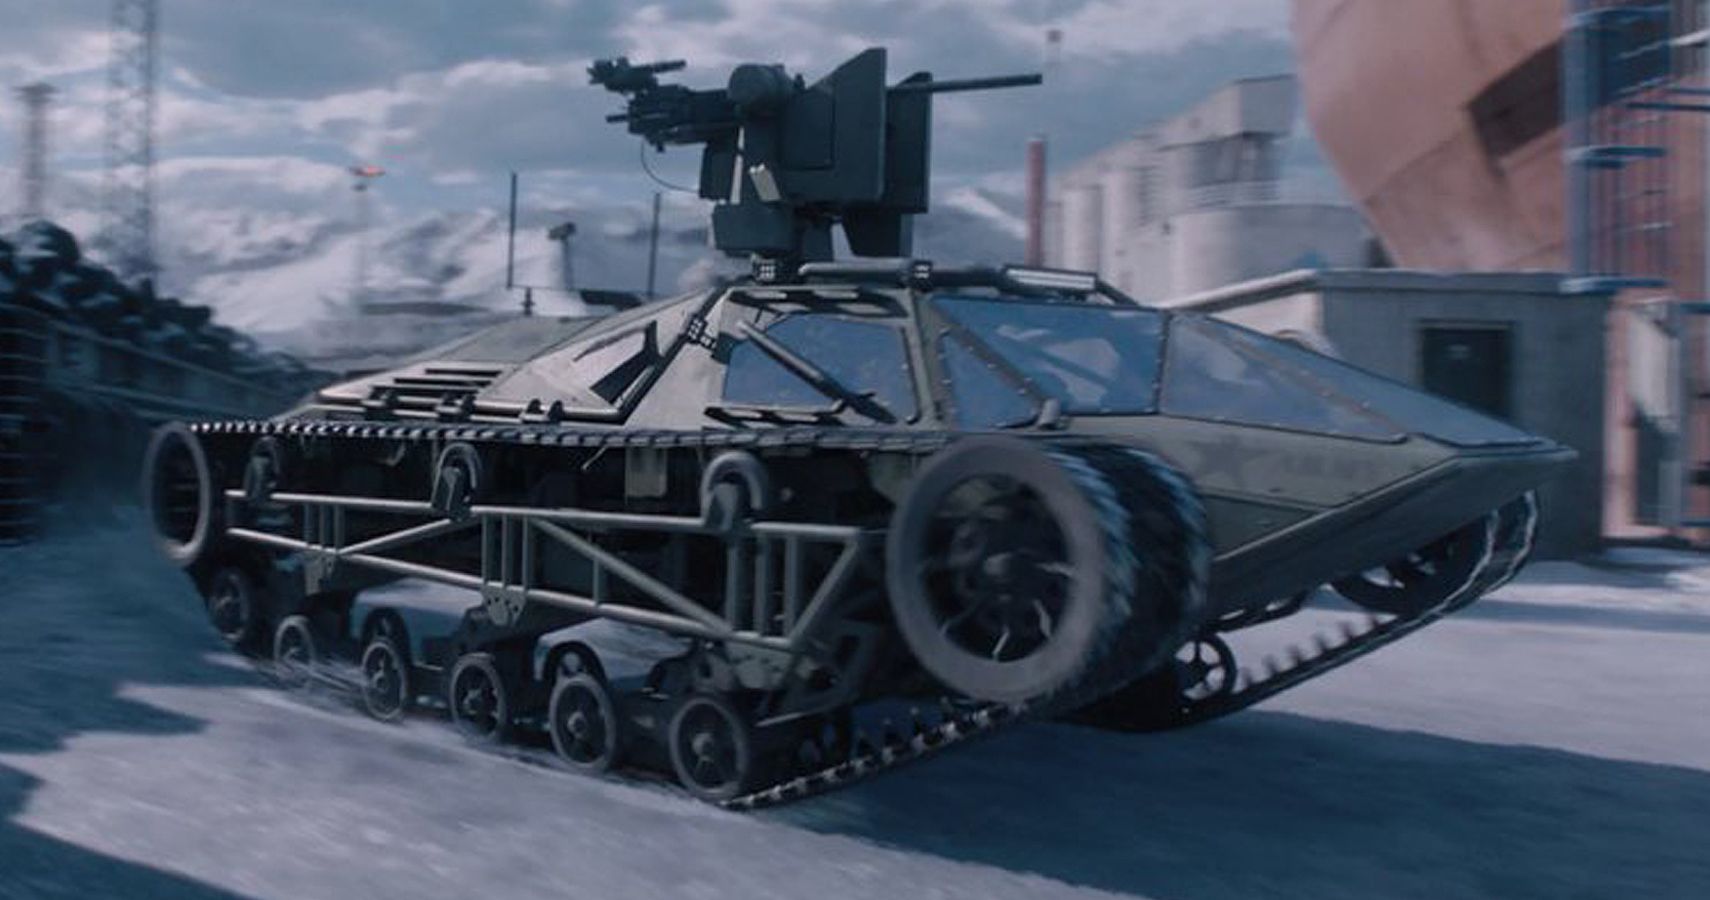 2009 Howe & Howe Ripsaw Tank Featured In Fast & Furious 8 Is Not Expensive